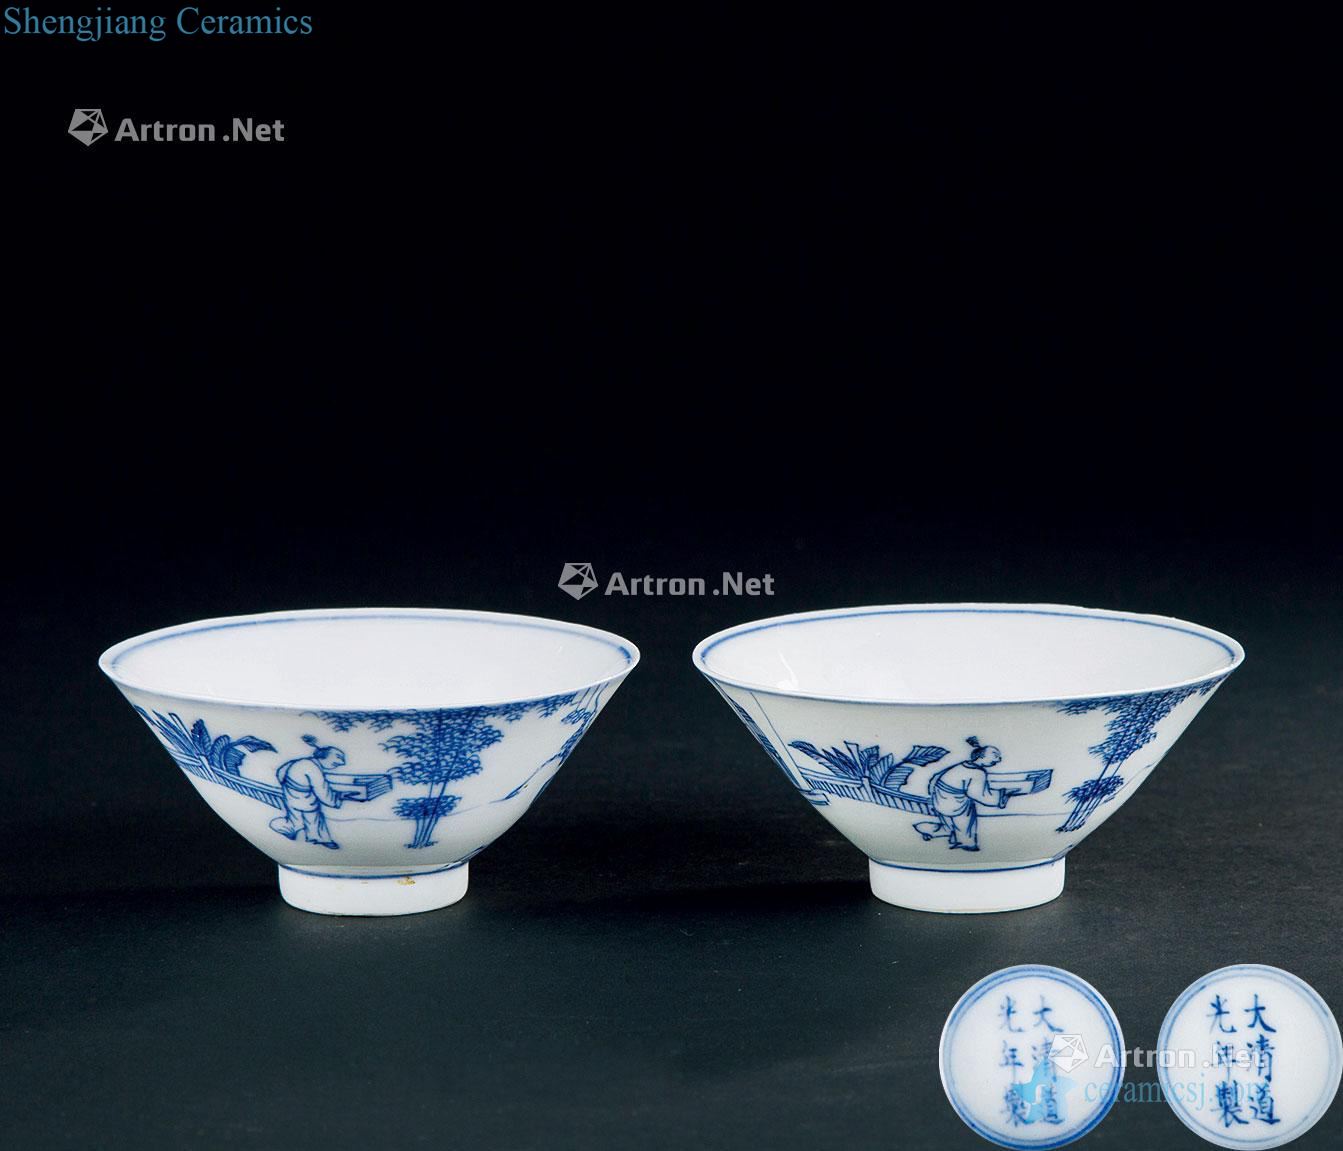 In the qing dynasty (1644-1911) blue and white lines hat to bowl (a)